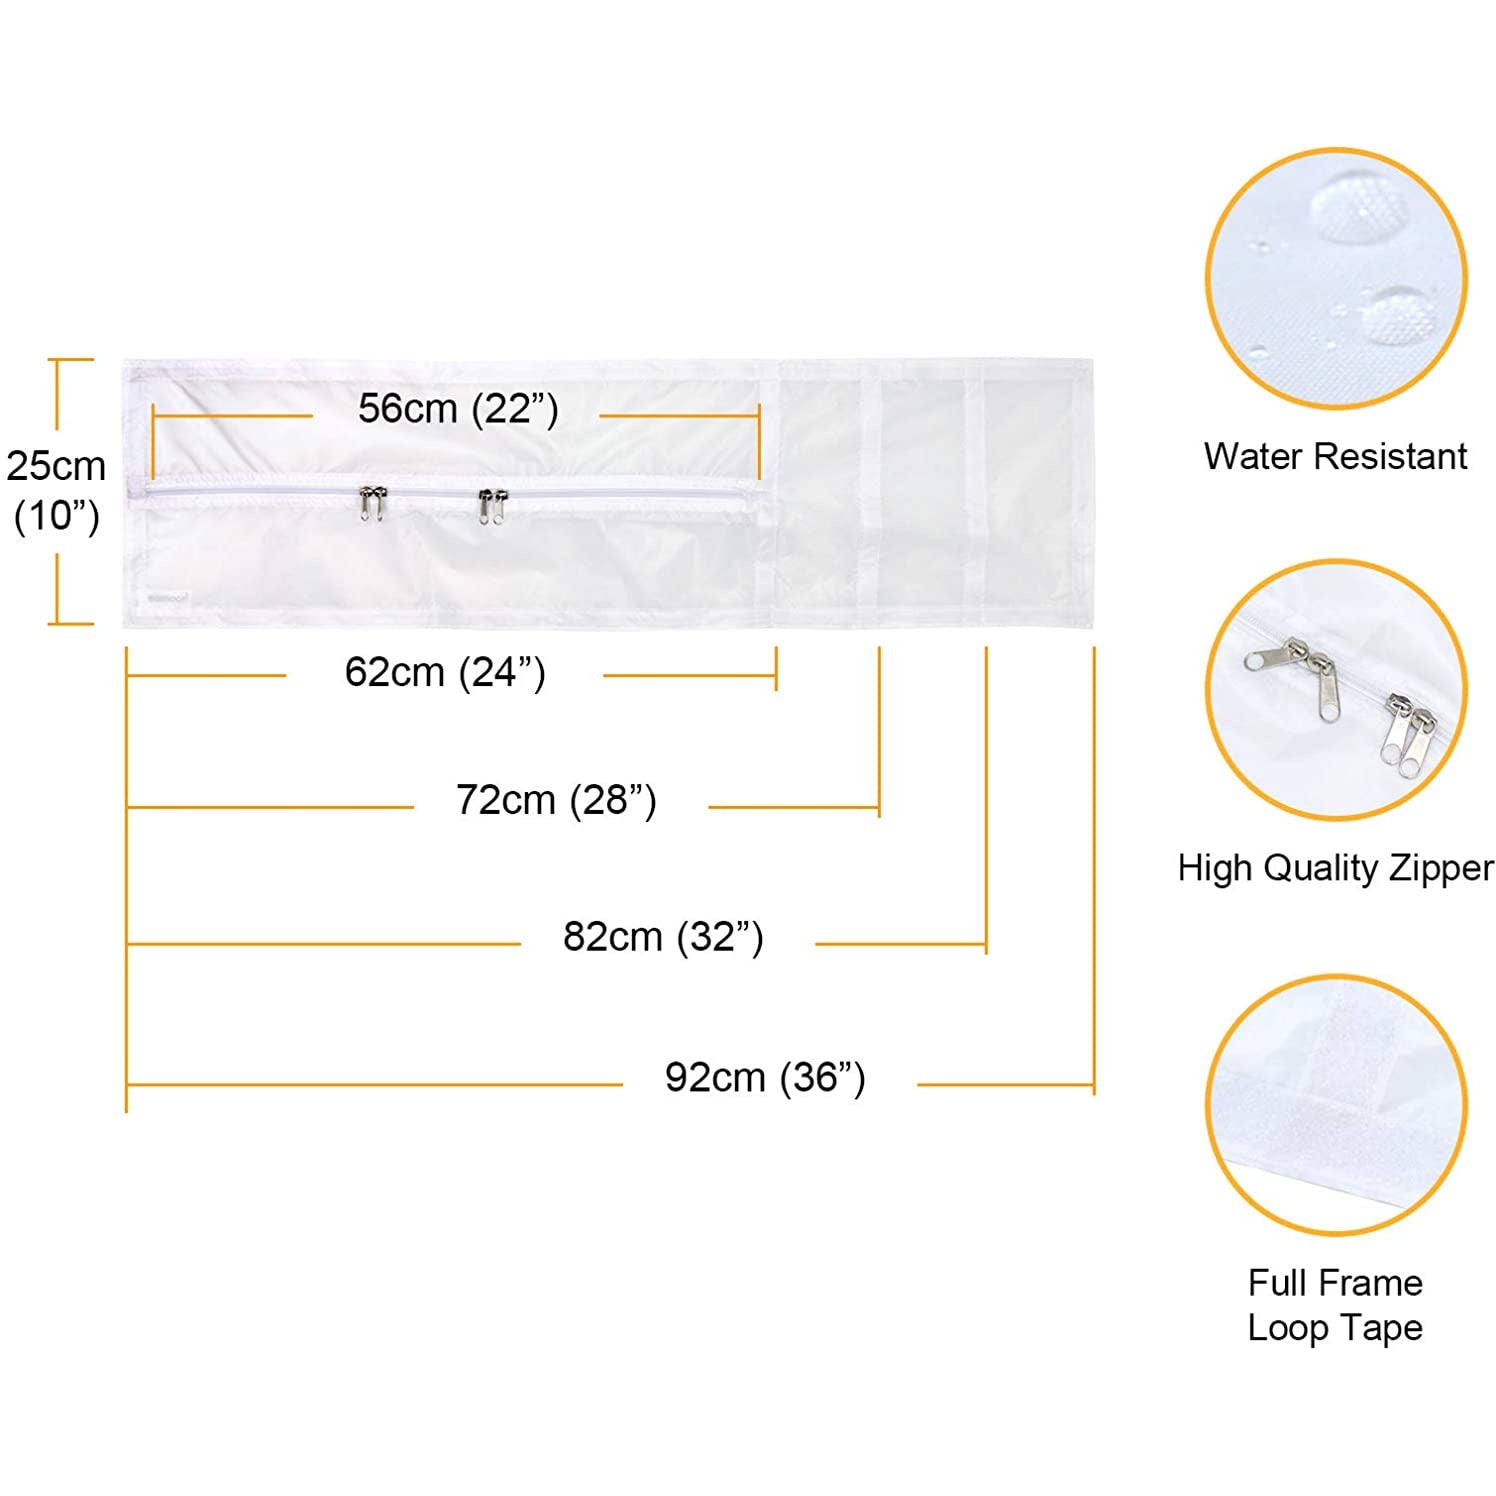 HOOMEE Adjustable Sliding Window Seal for Portable Air Conditioner and Tumble Dryer –Min Size 25x62 cm Max Size25x92cm - Works with Sliding and Hung Windows, Easy to Install, Waterproof